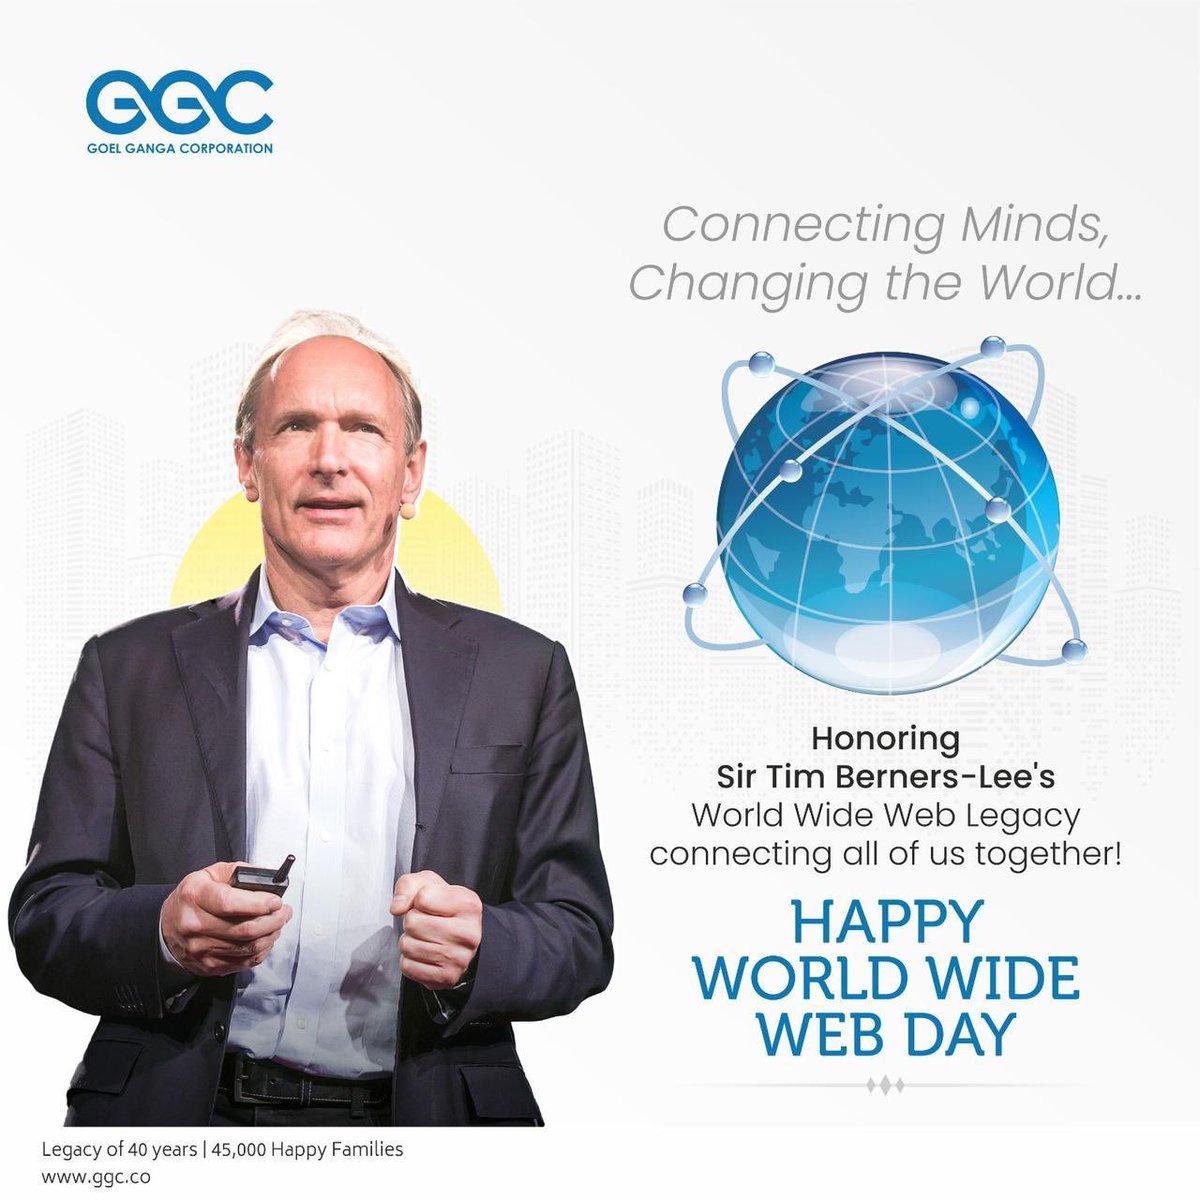 🌐 Happy World Wide Web Day! 🎉 

Today, we celebrate the incredible impact of the internet and its founder, Sir Tim Berners-Lee, who revolutionized the way we connect, learn, and share information globally! 🚀

#WorldWideWebDay #TimBernersLee #InternetRevolution